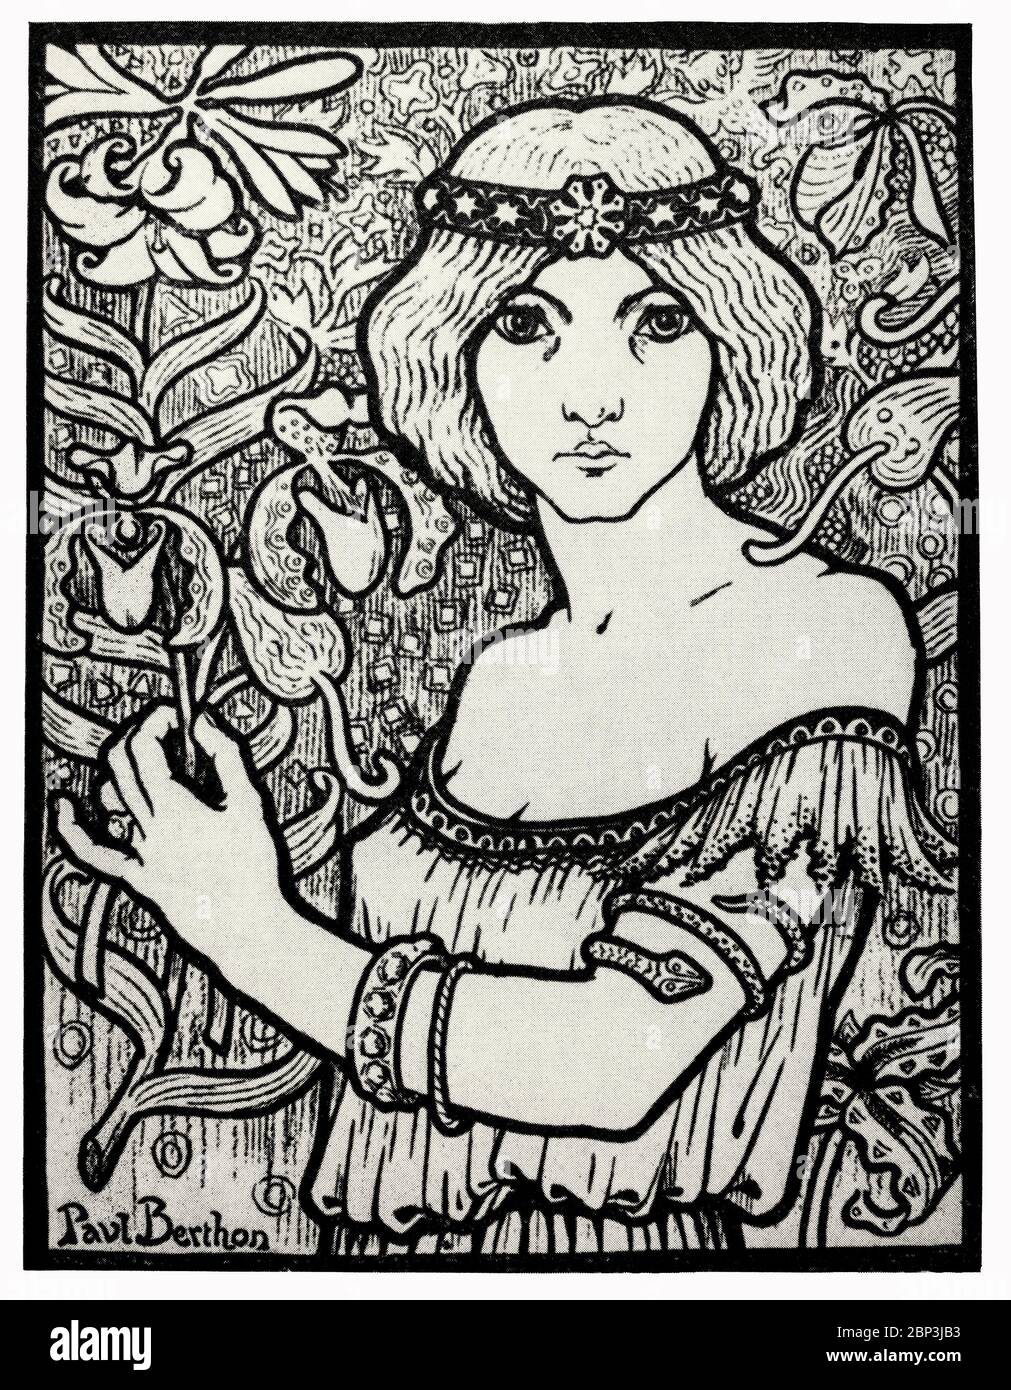 A poster for the 'Salon des Cent' by Paul Berthon (1872-1934), a French artist who produced primarily posters and lithographs. His work is in the style of Art Nouveau, much like his contemporary Alphonse Mucha. Berthon's study of the decorative arts influenced his print making, influencing the strong lines and natural details that guided his art. The vast majority of Berthon's lithographed posters did not include advertisements and were meant to stand on their own. Stock Photo